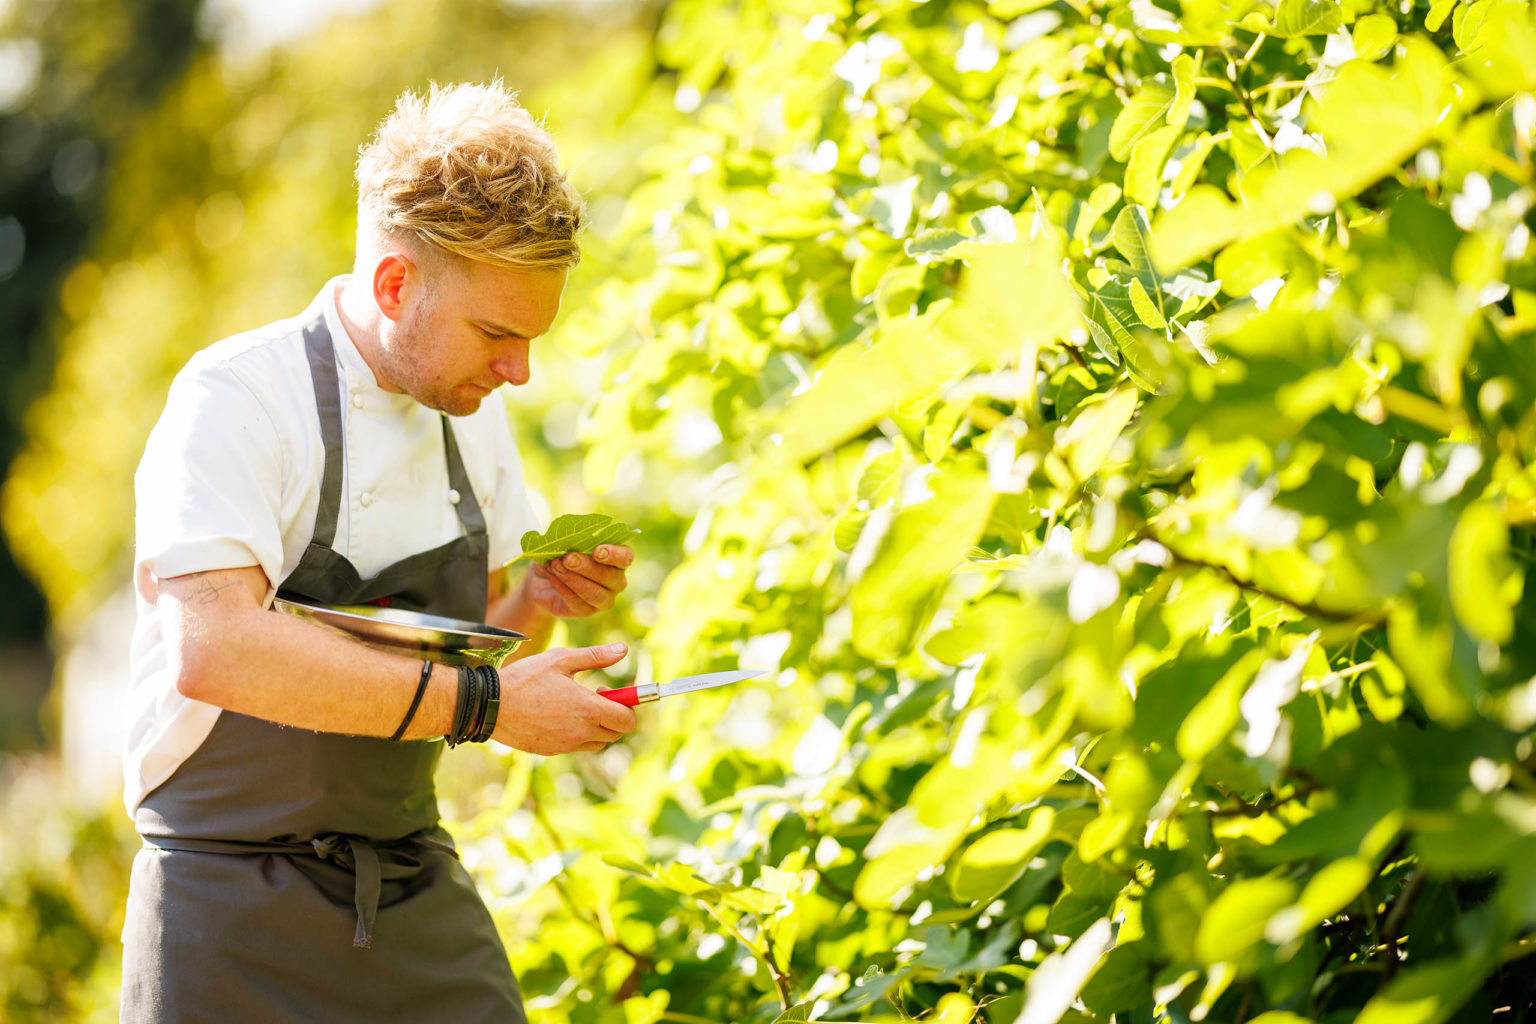 A chef in the Walled Garden inspecting a leaf for use in the kitchen on the Swinton Estate in North Yorkshire